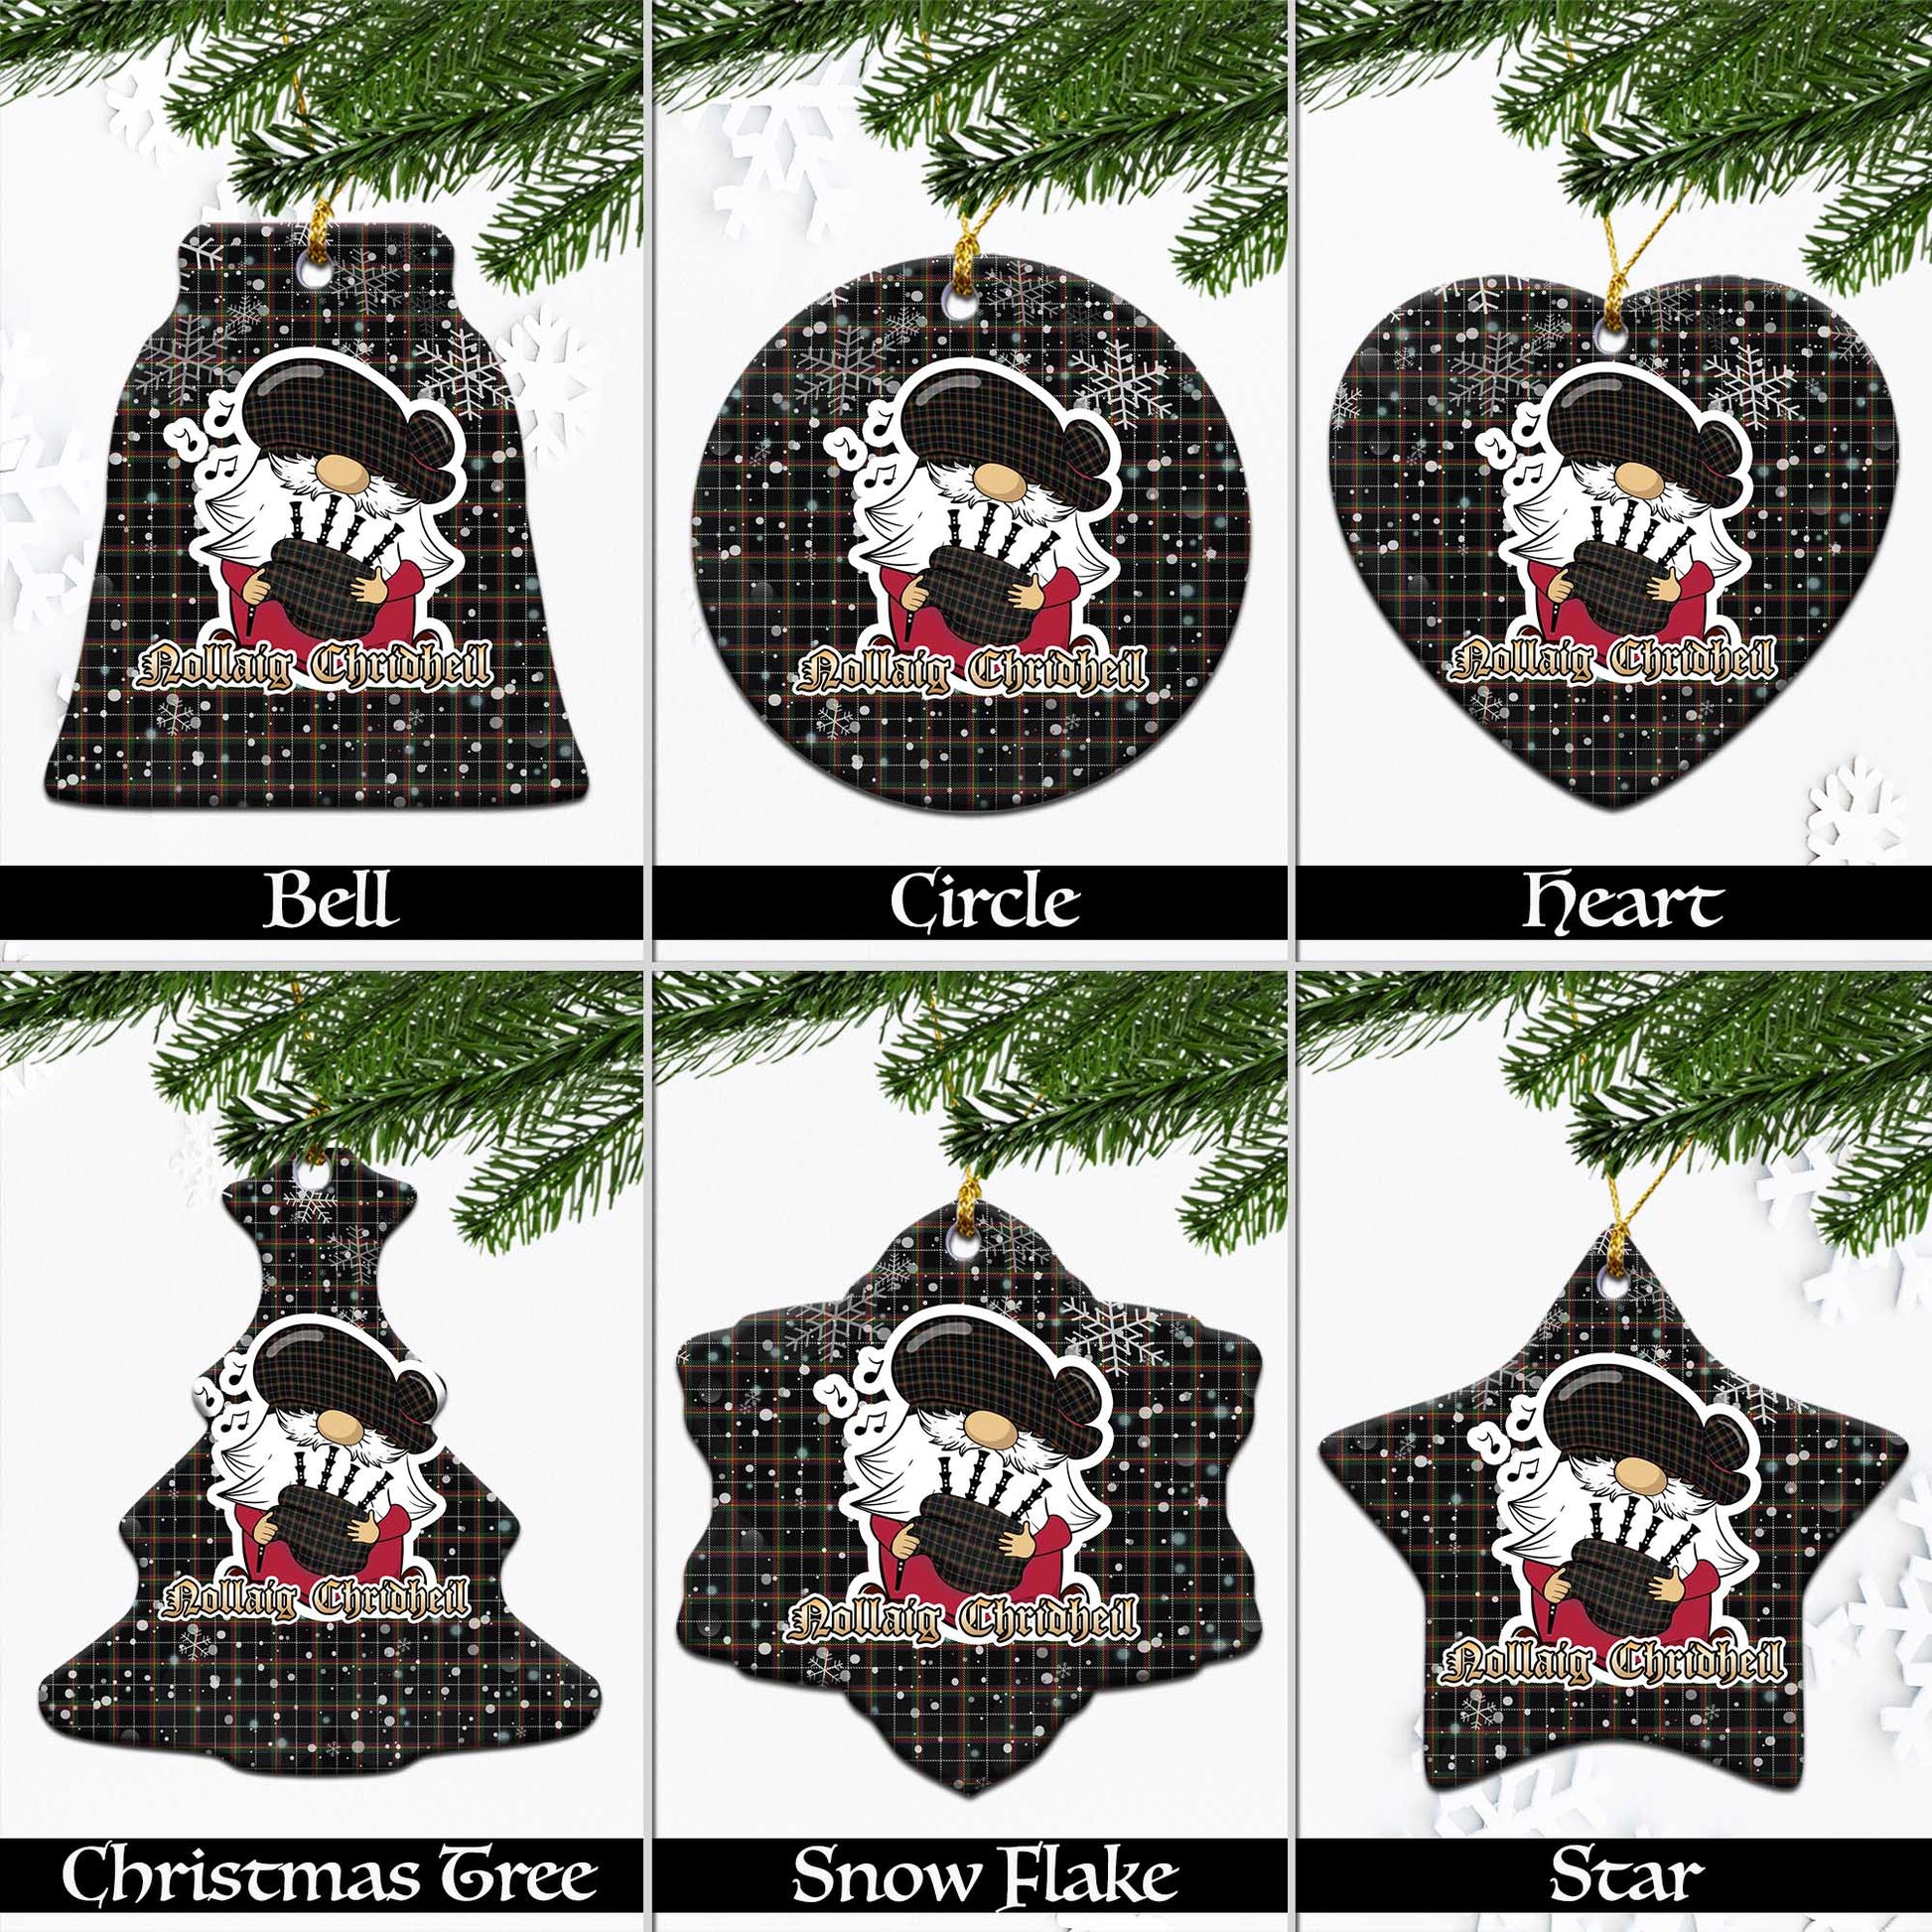 stott-tartan-christmas-ornaments-with-scottish-gnome-playing-bagpipes